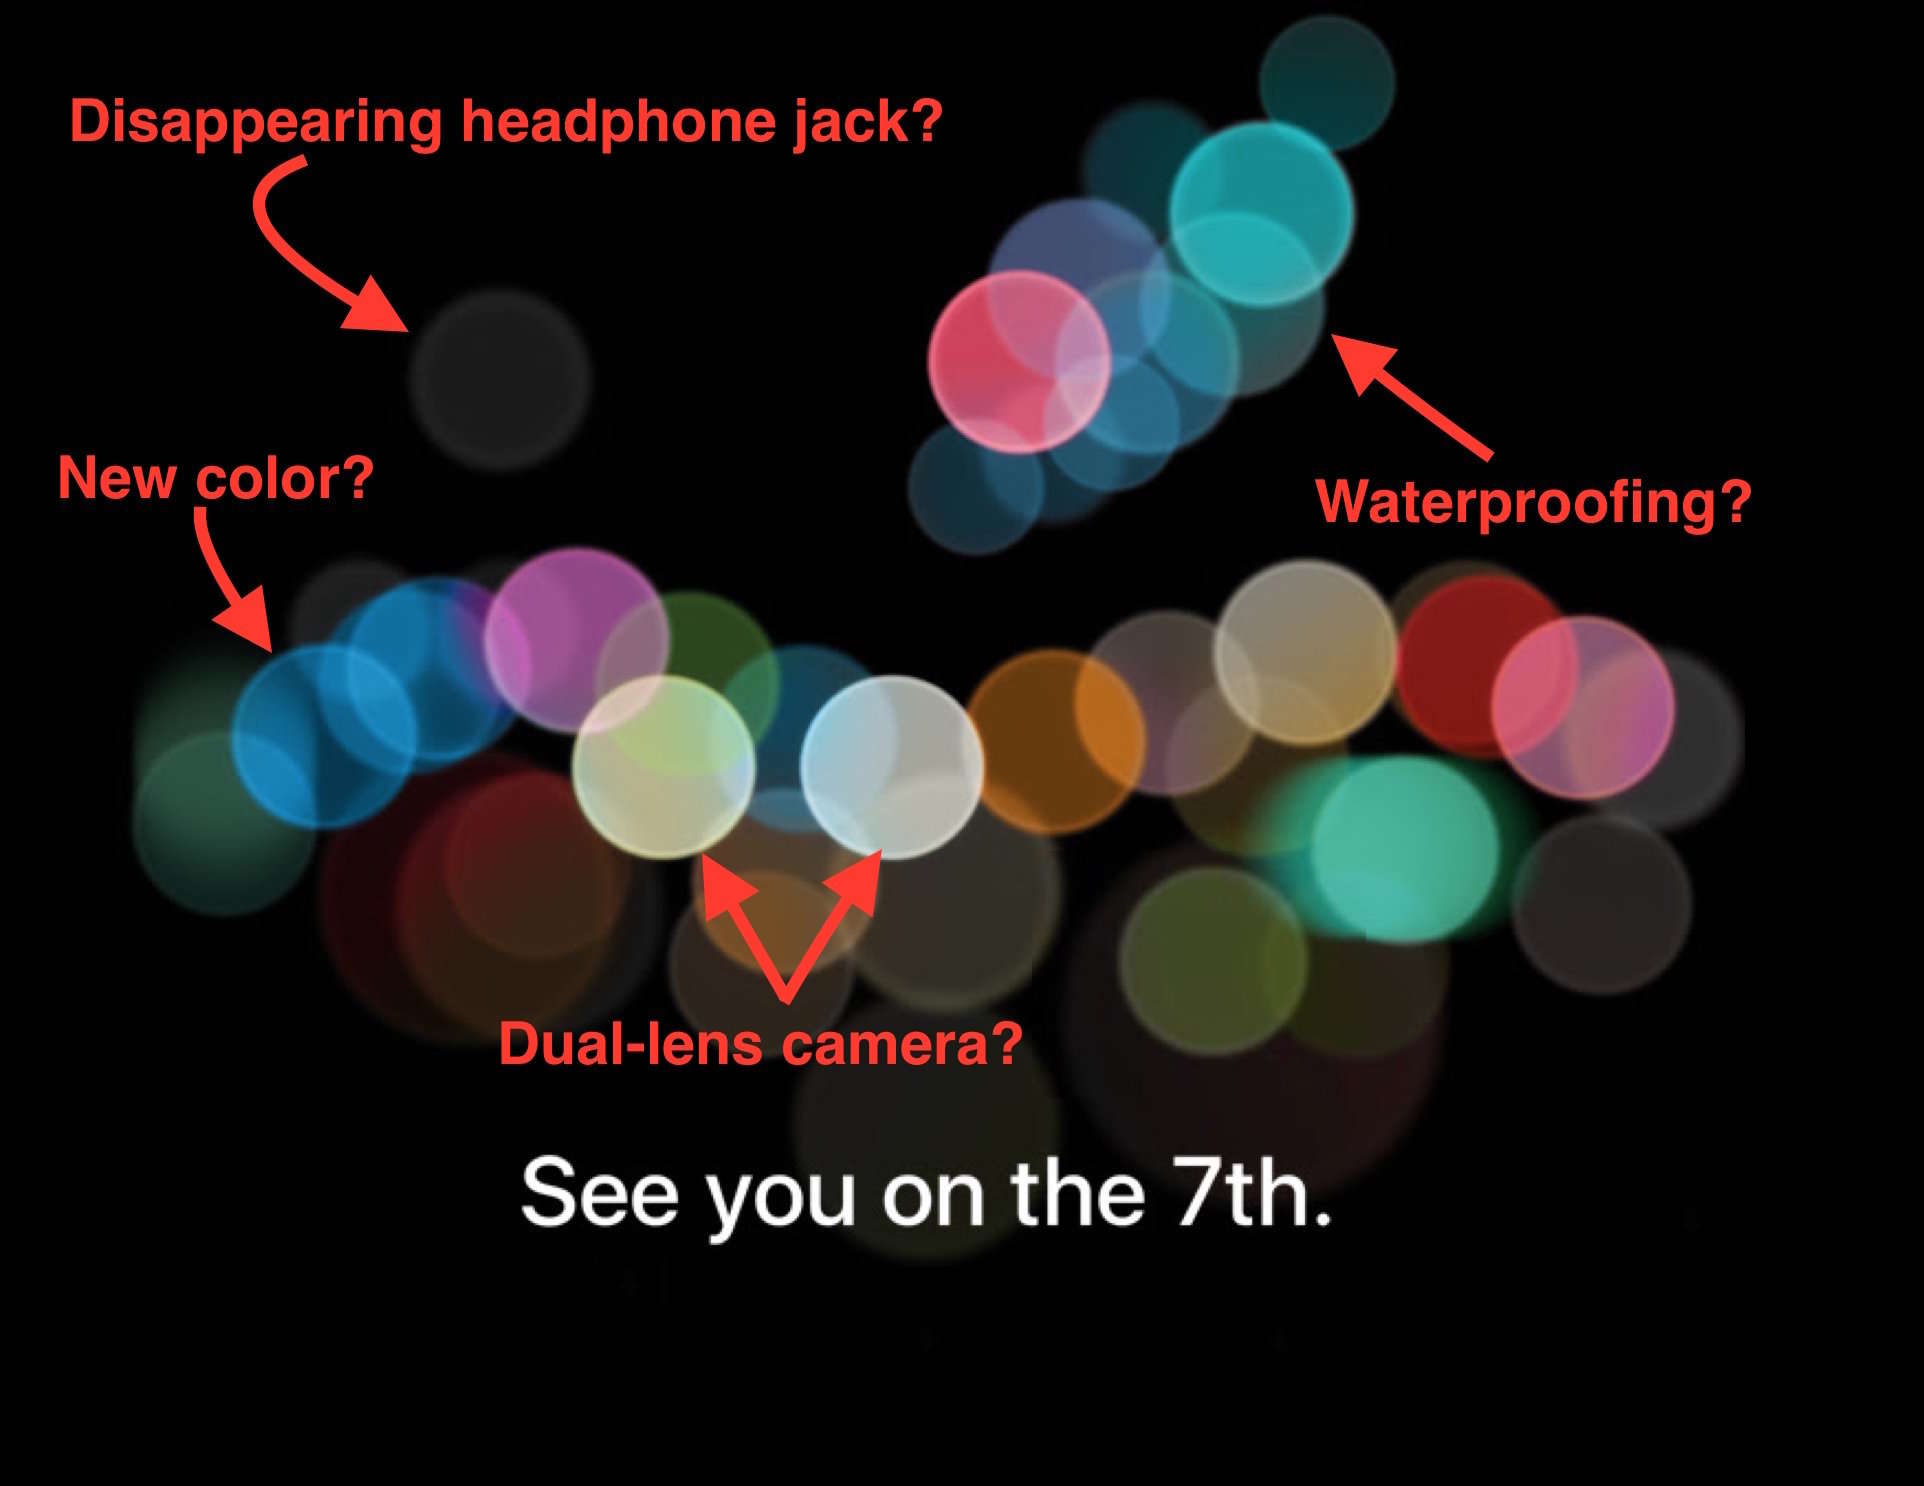 What do you see in Apple's invite?